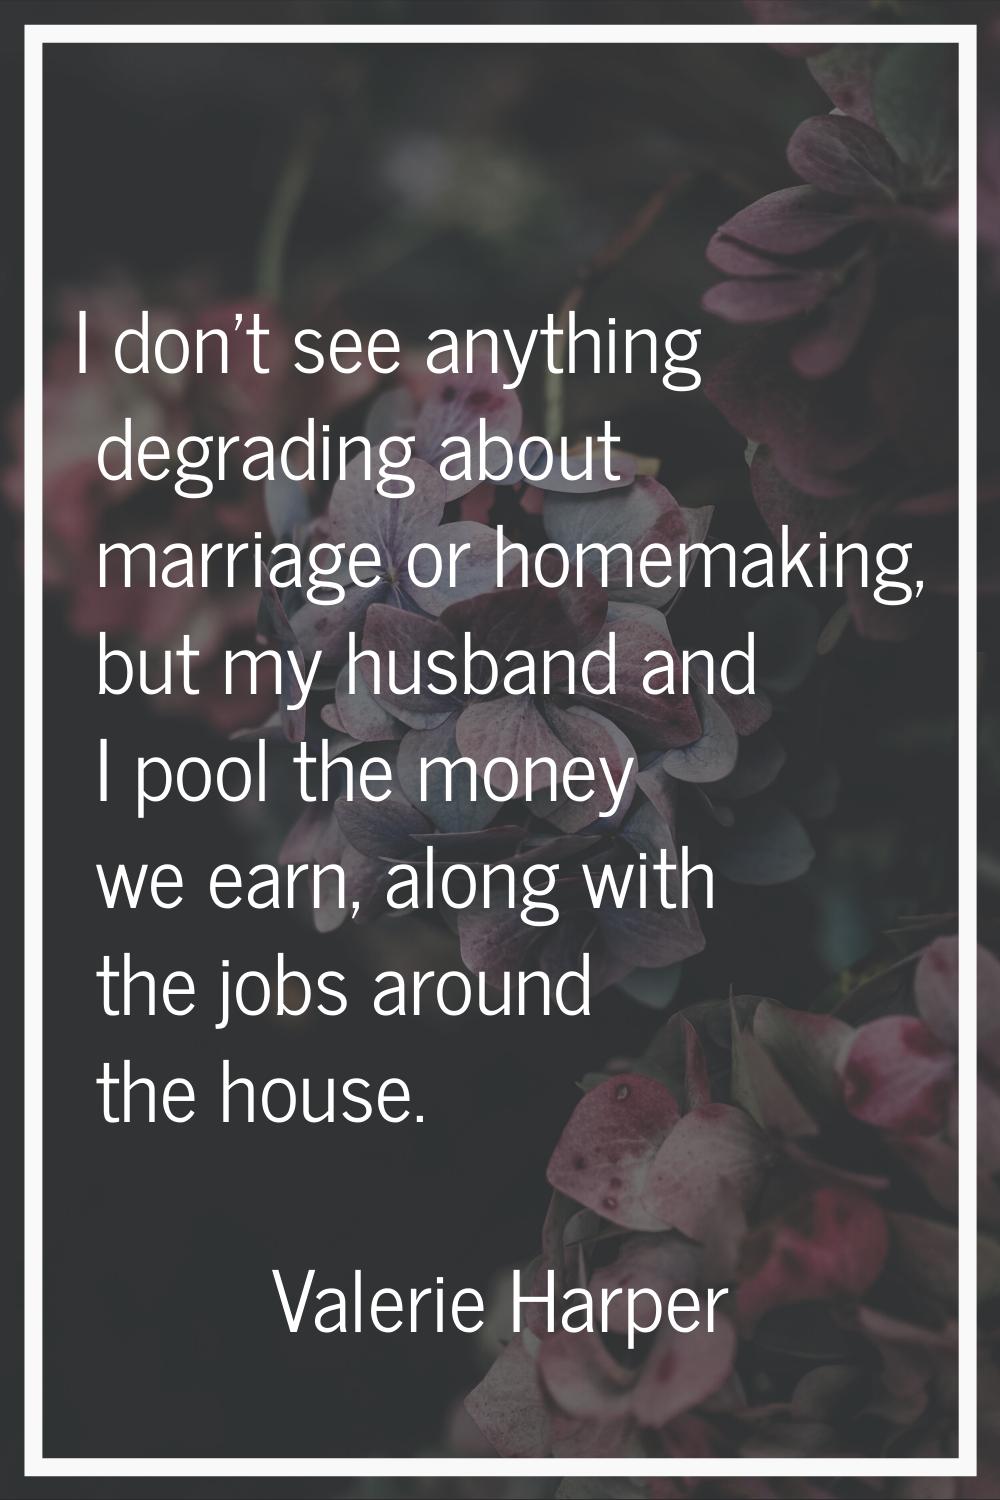 I don't see anything degrading about marriage or homemaking, but my husband and I pool the money we